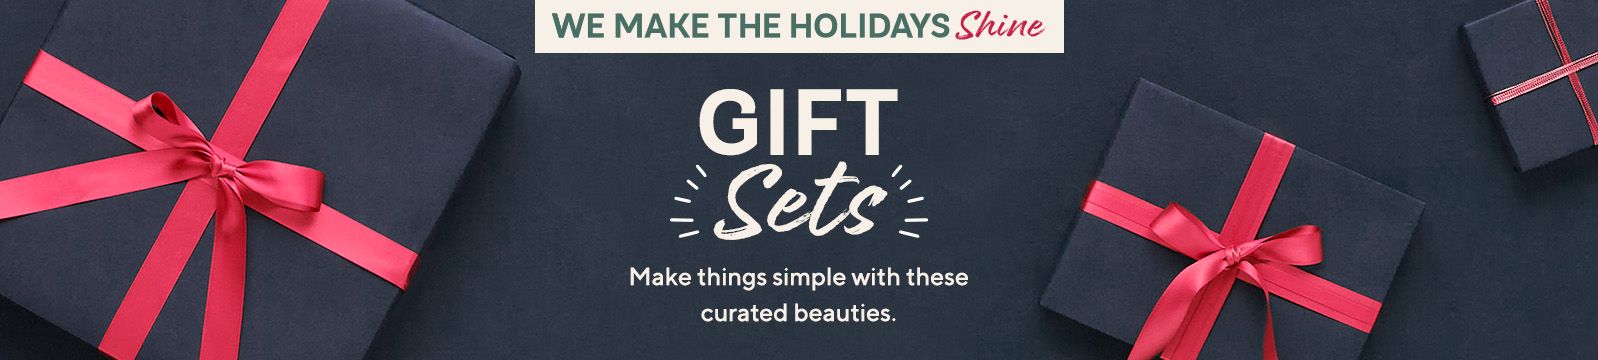 We Make the Holidays Shine. Gift Sets. Make things simple with these curated beauties.